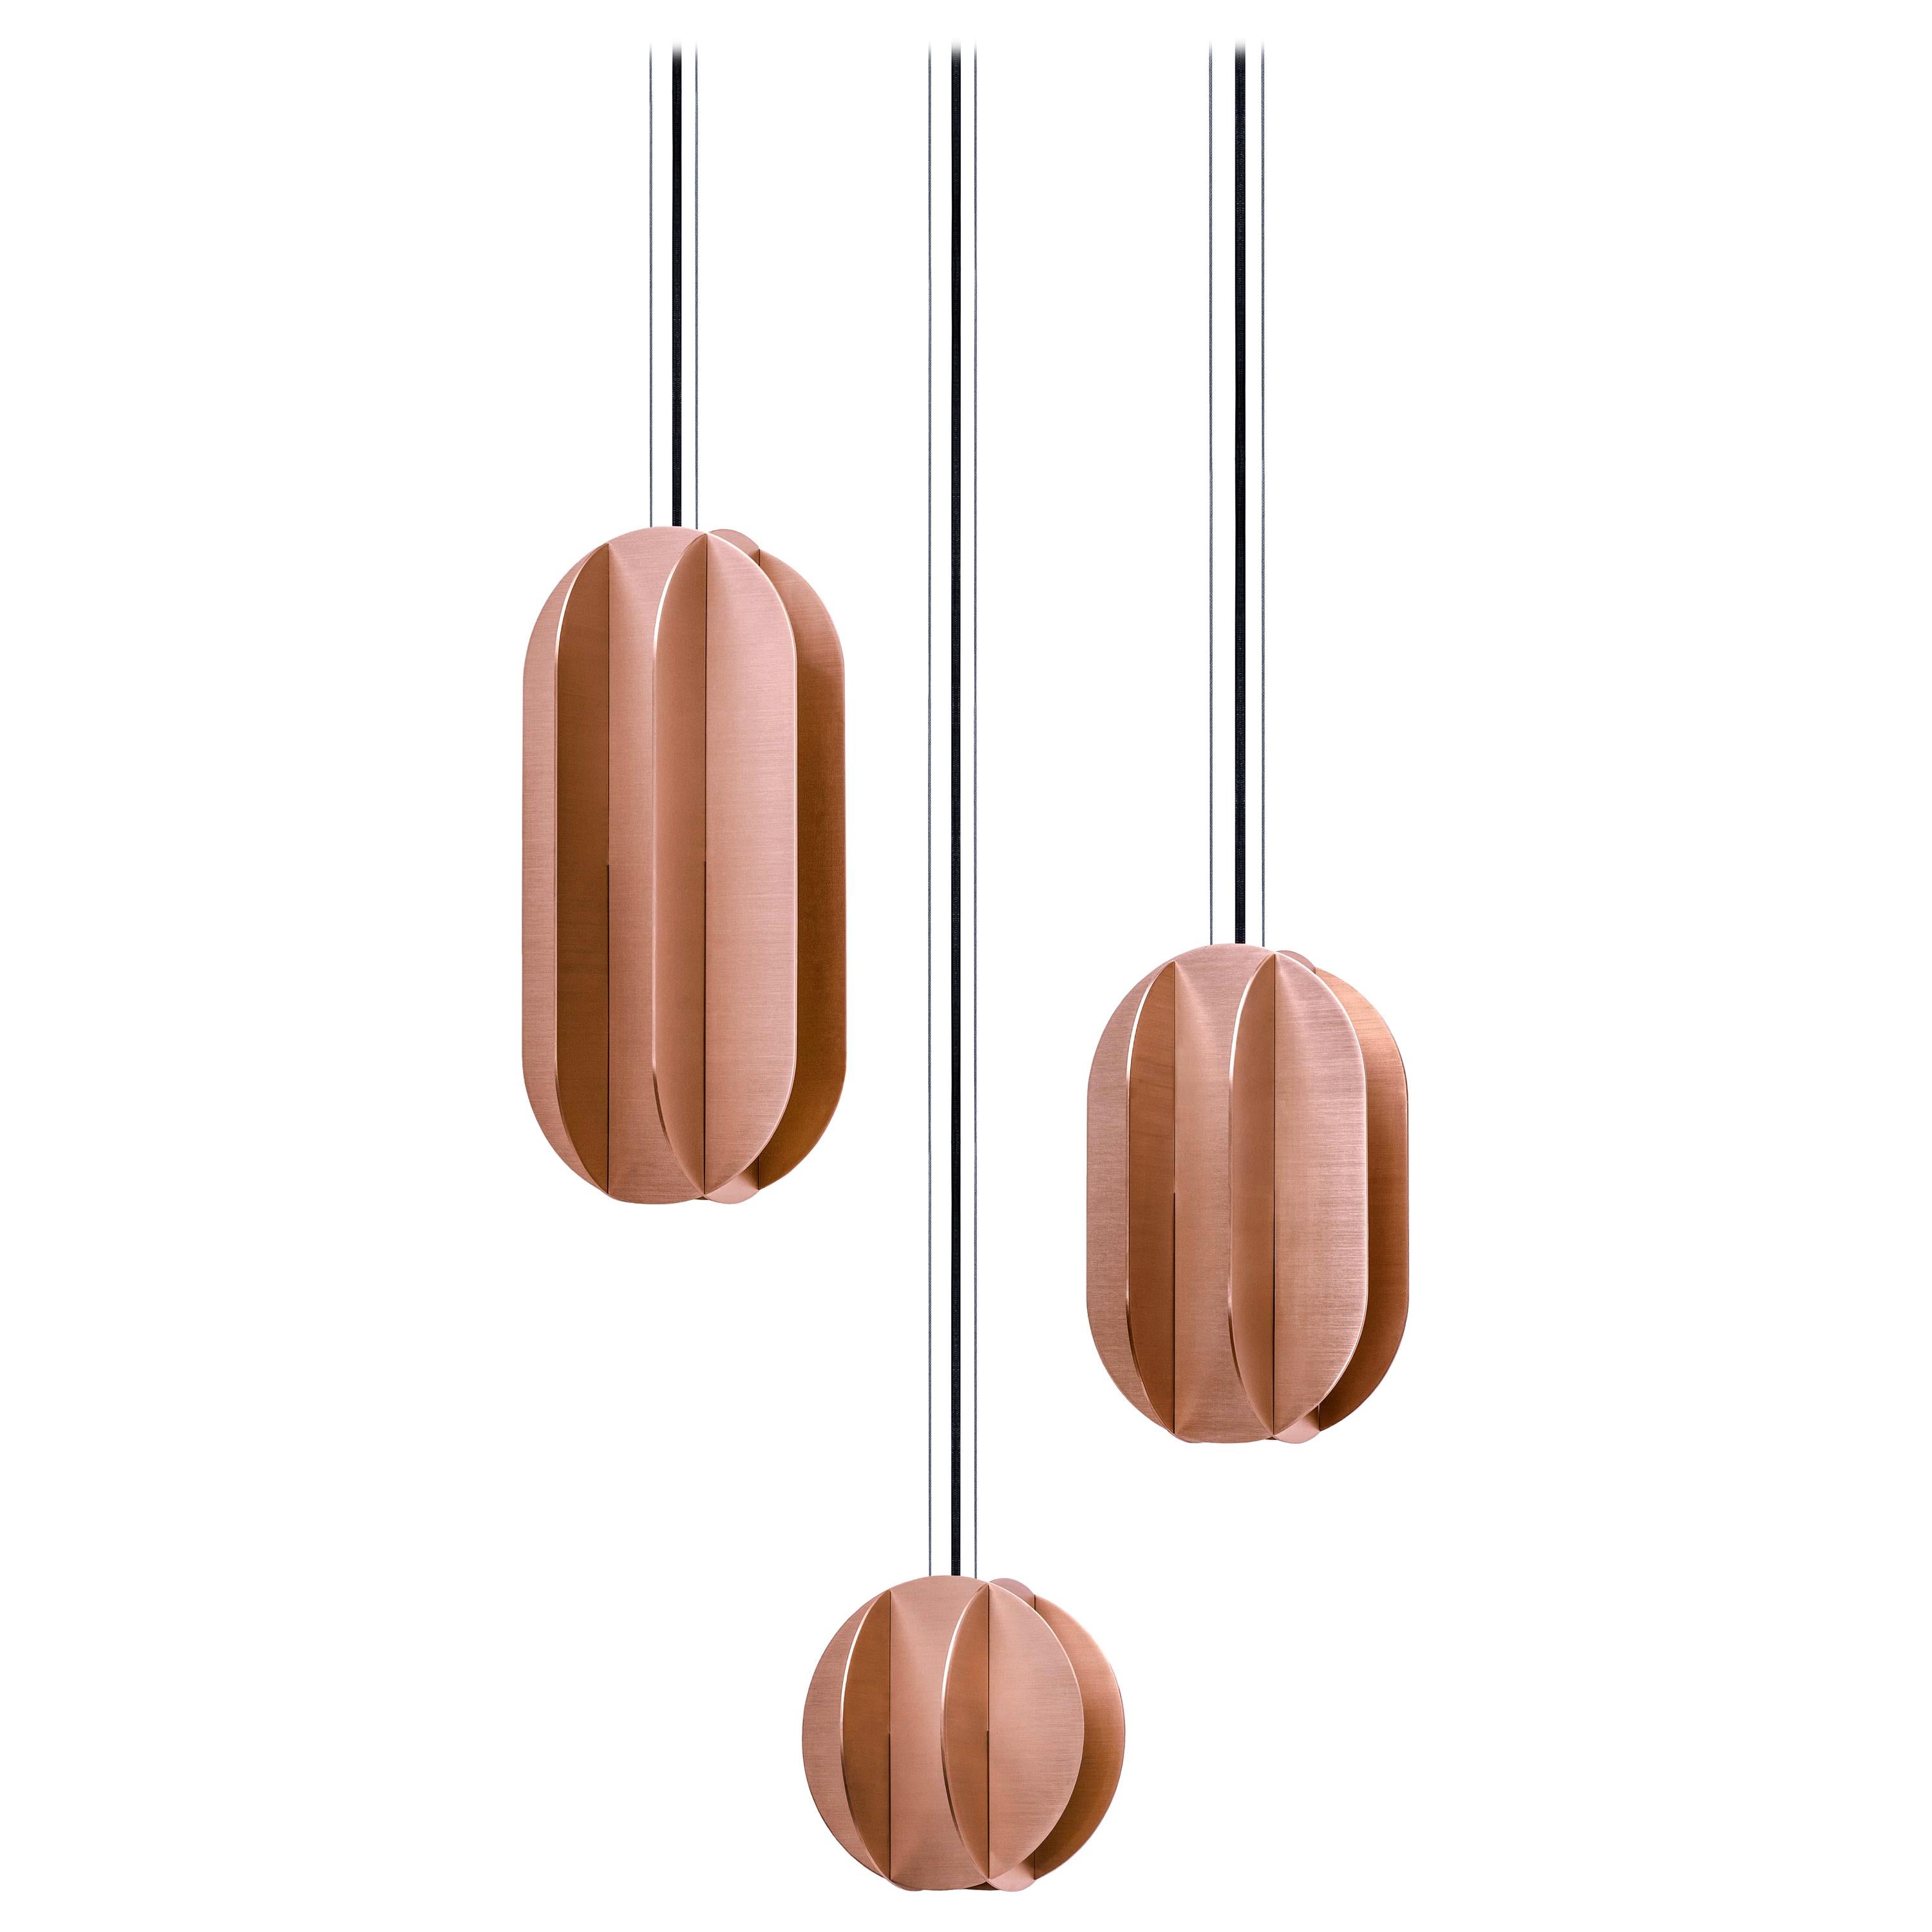 Set of Three Contemporary Pendant Lamp EL Lamps CS2 by NOOM in Copper